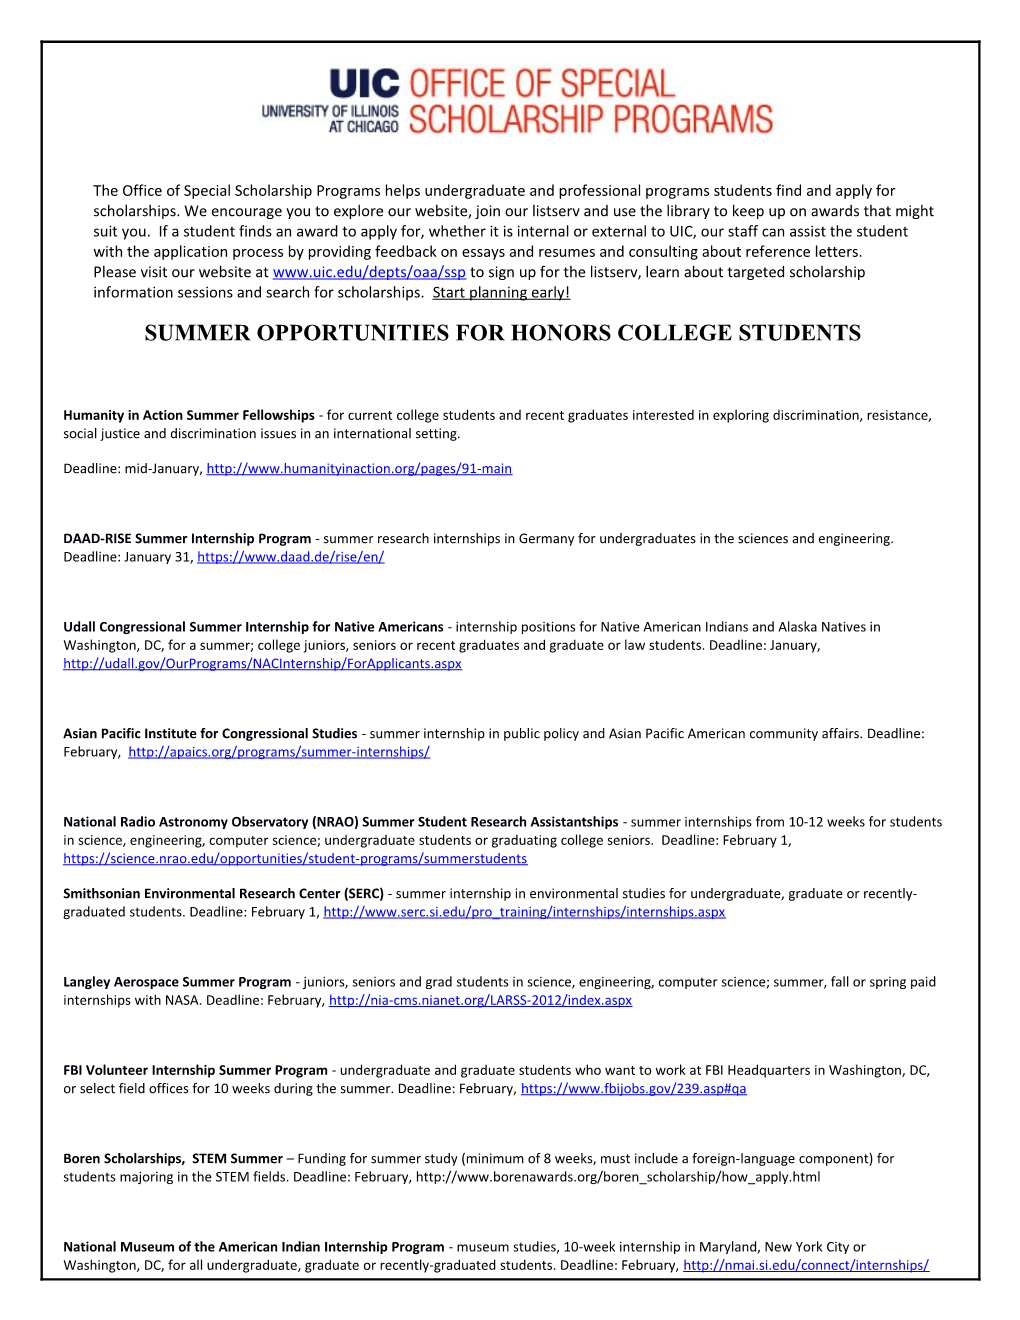 Summer Opportunities for Honors College Students